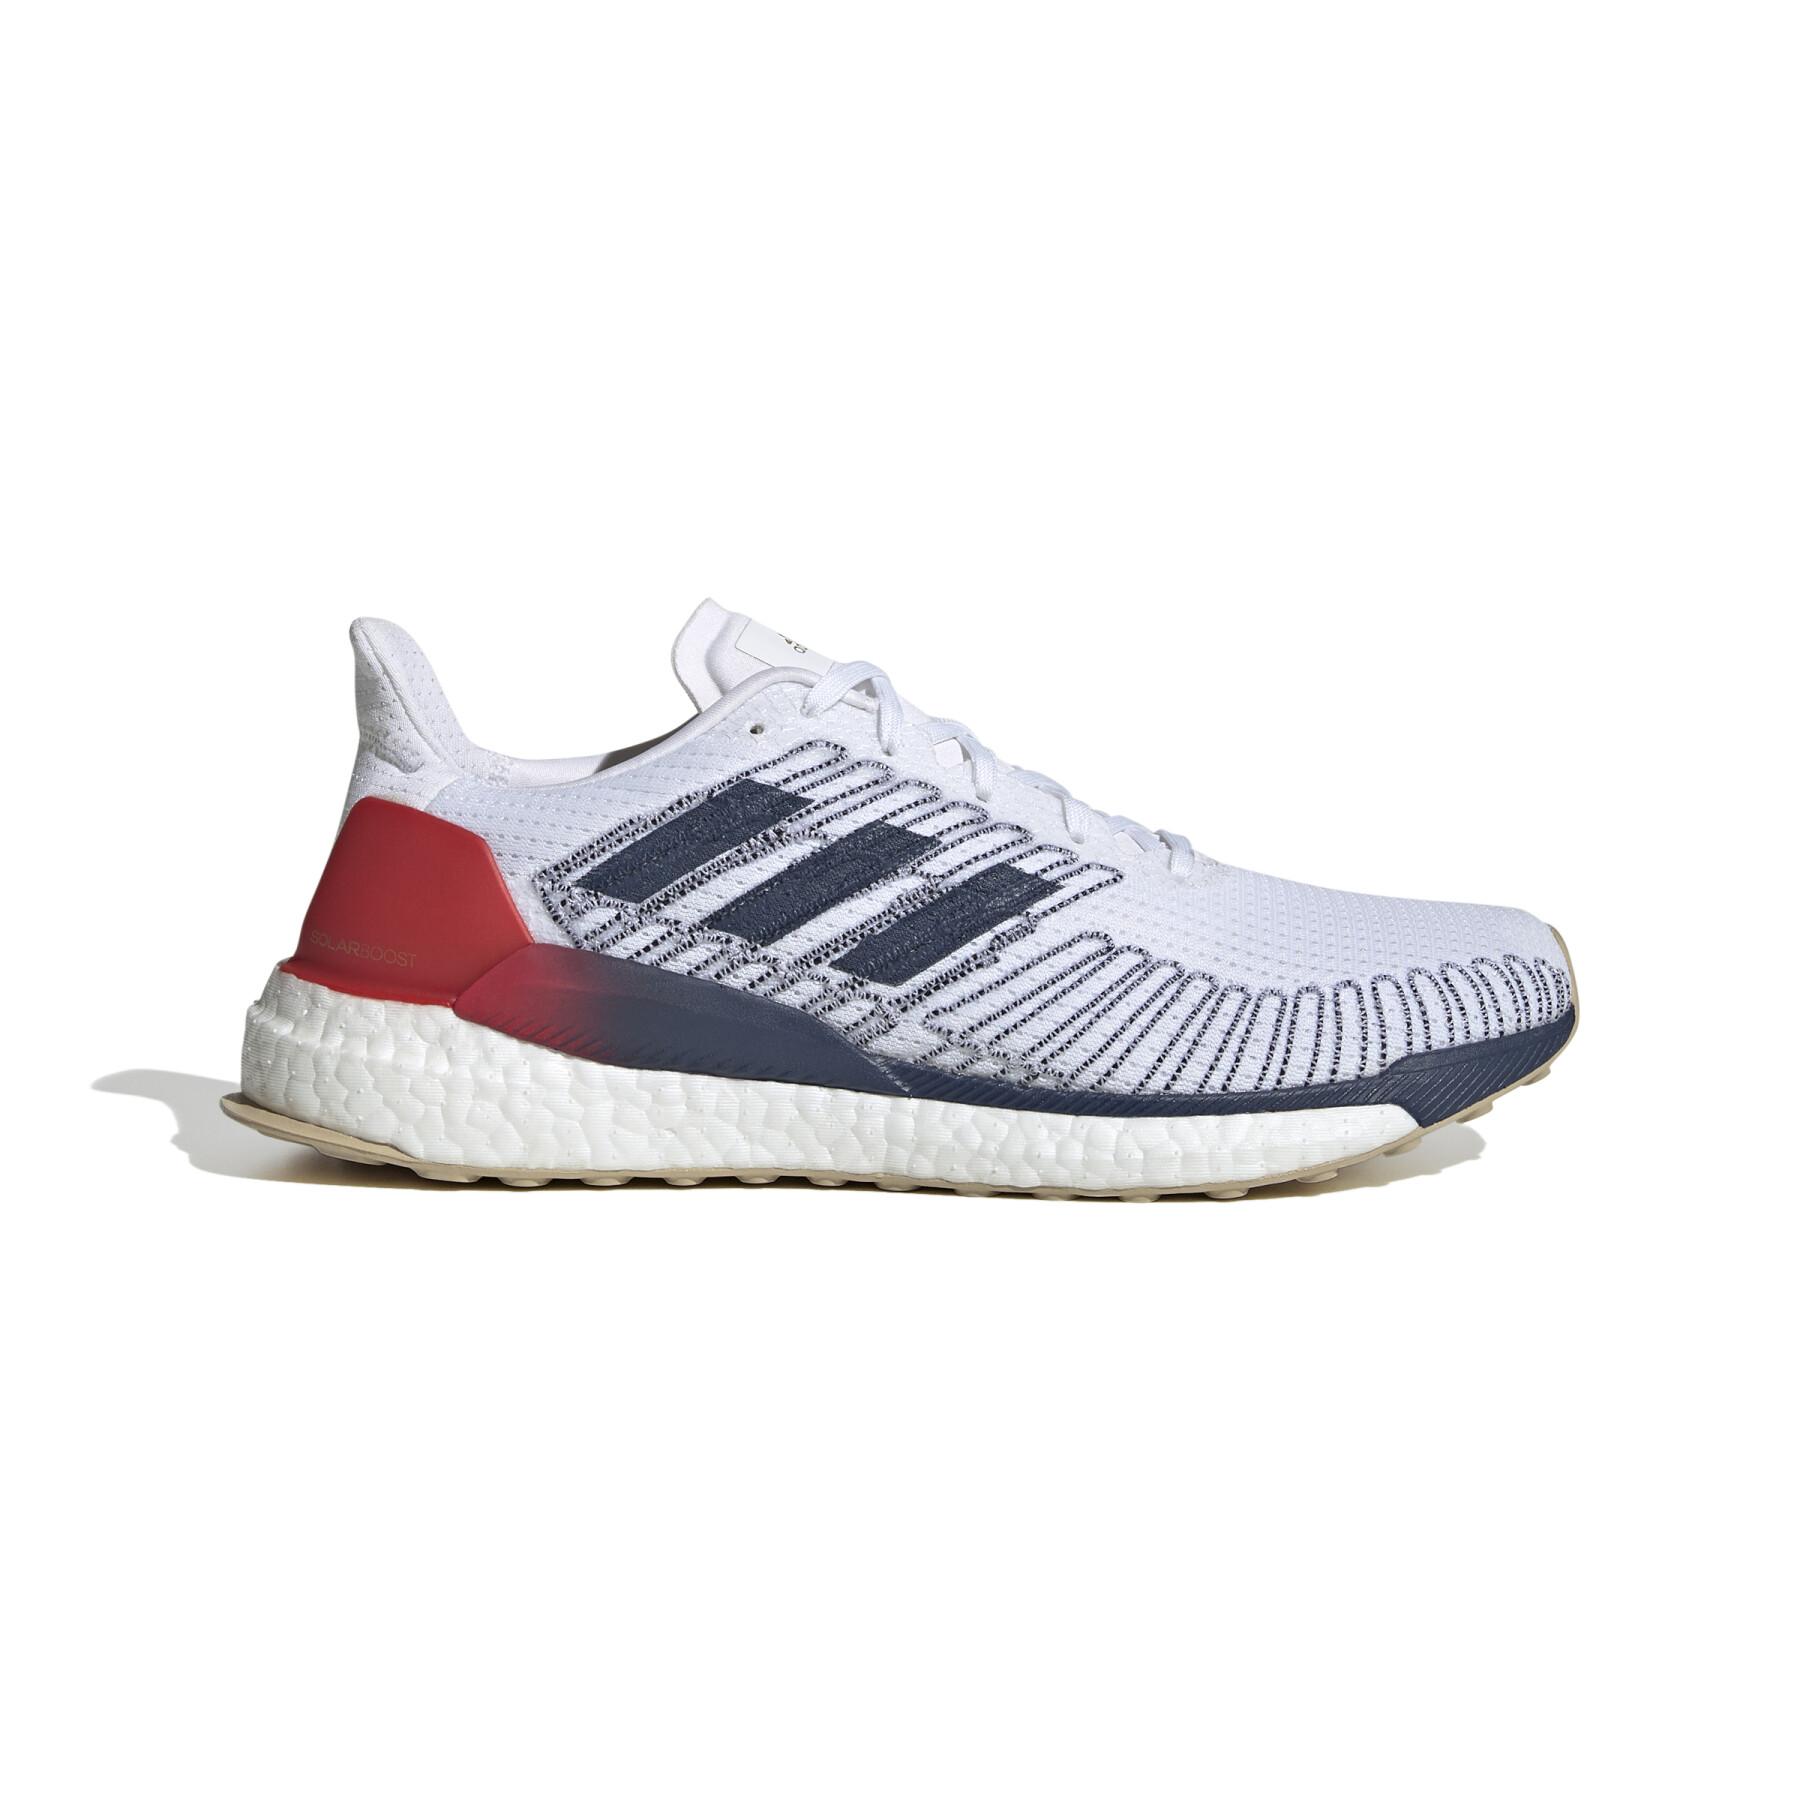 Running shoes adidas Solarboost 19